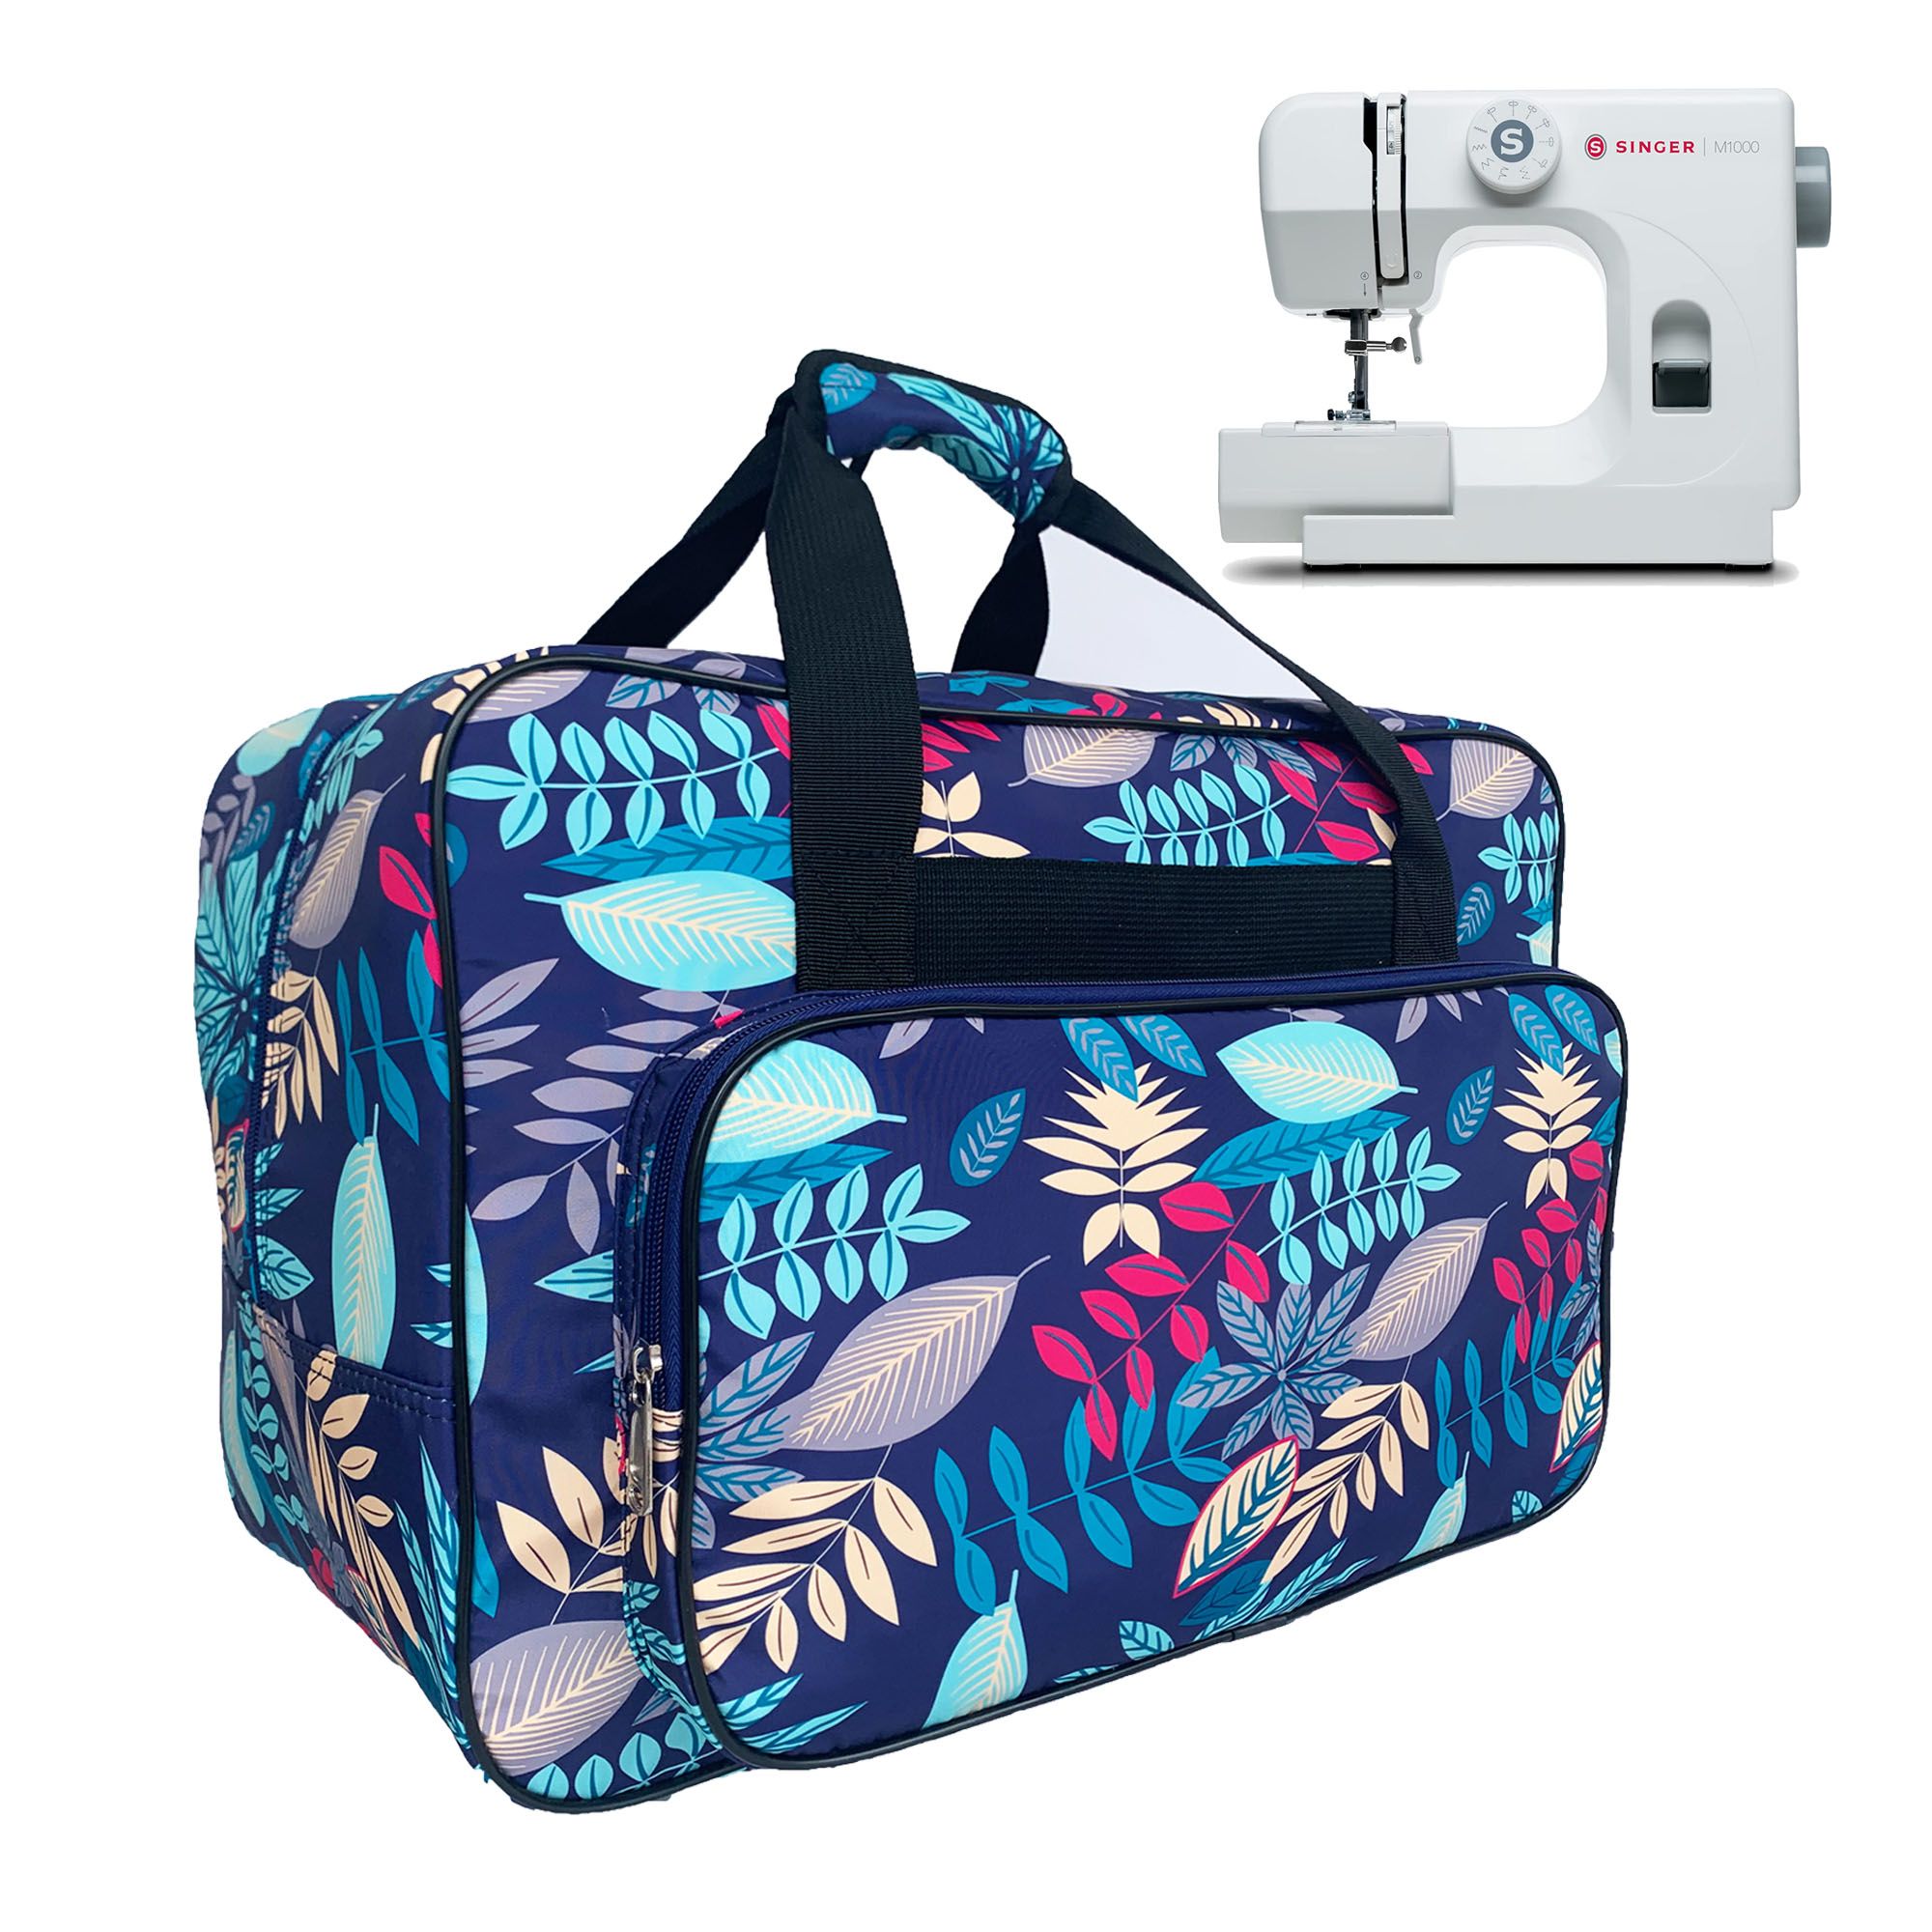 Sewing Machine Carrying Case with Multiple Storage Pockets, Universal Tote  Bag with Shoulder Strap Compatible with Most Standard Singer, Brother,  Janome, Floral 